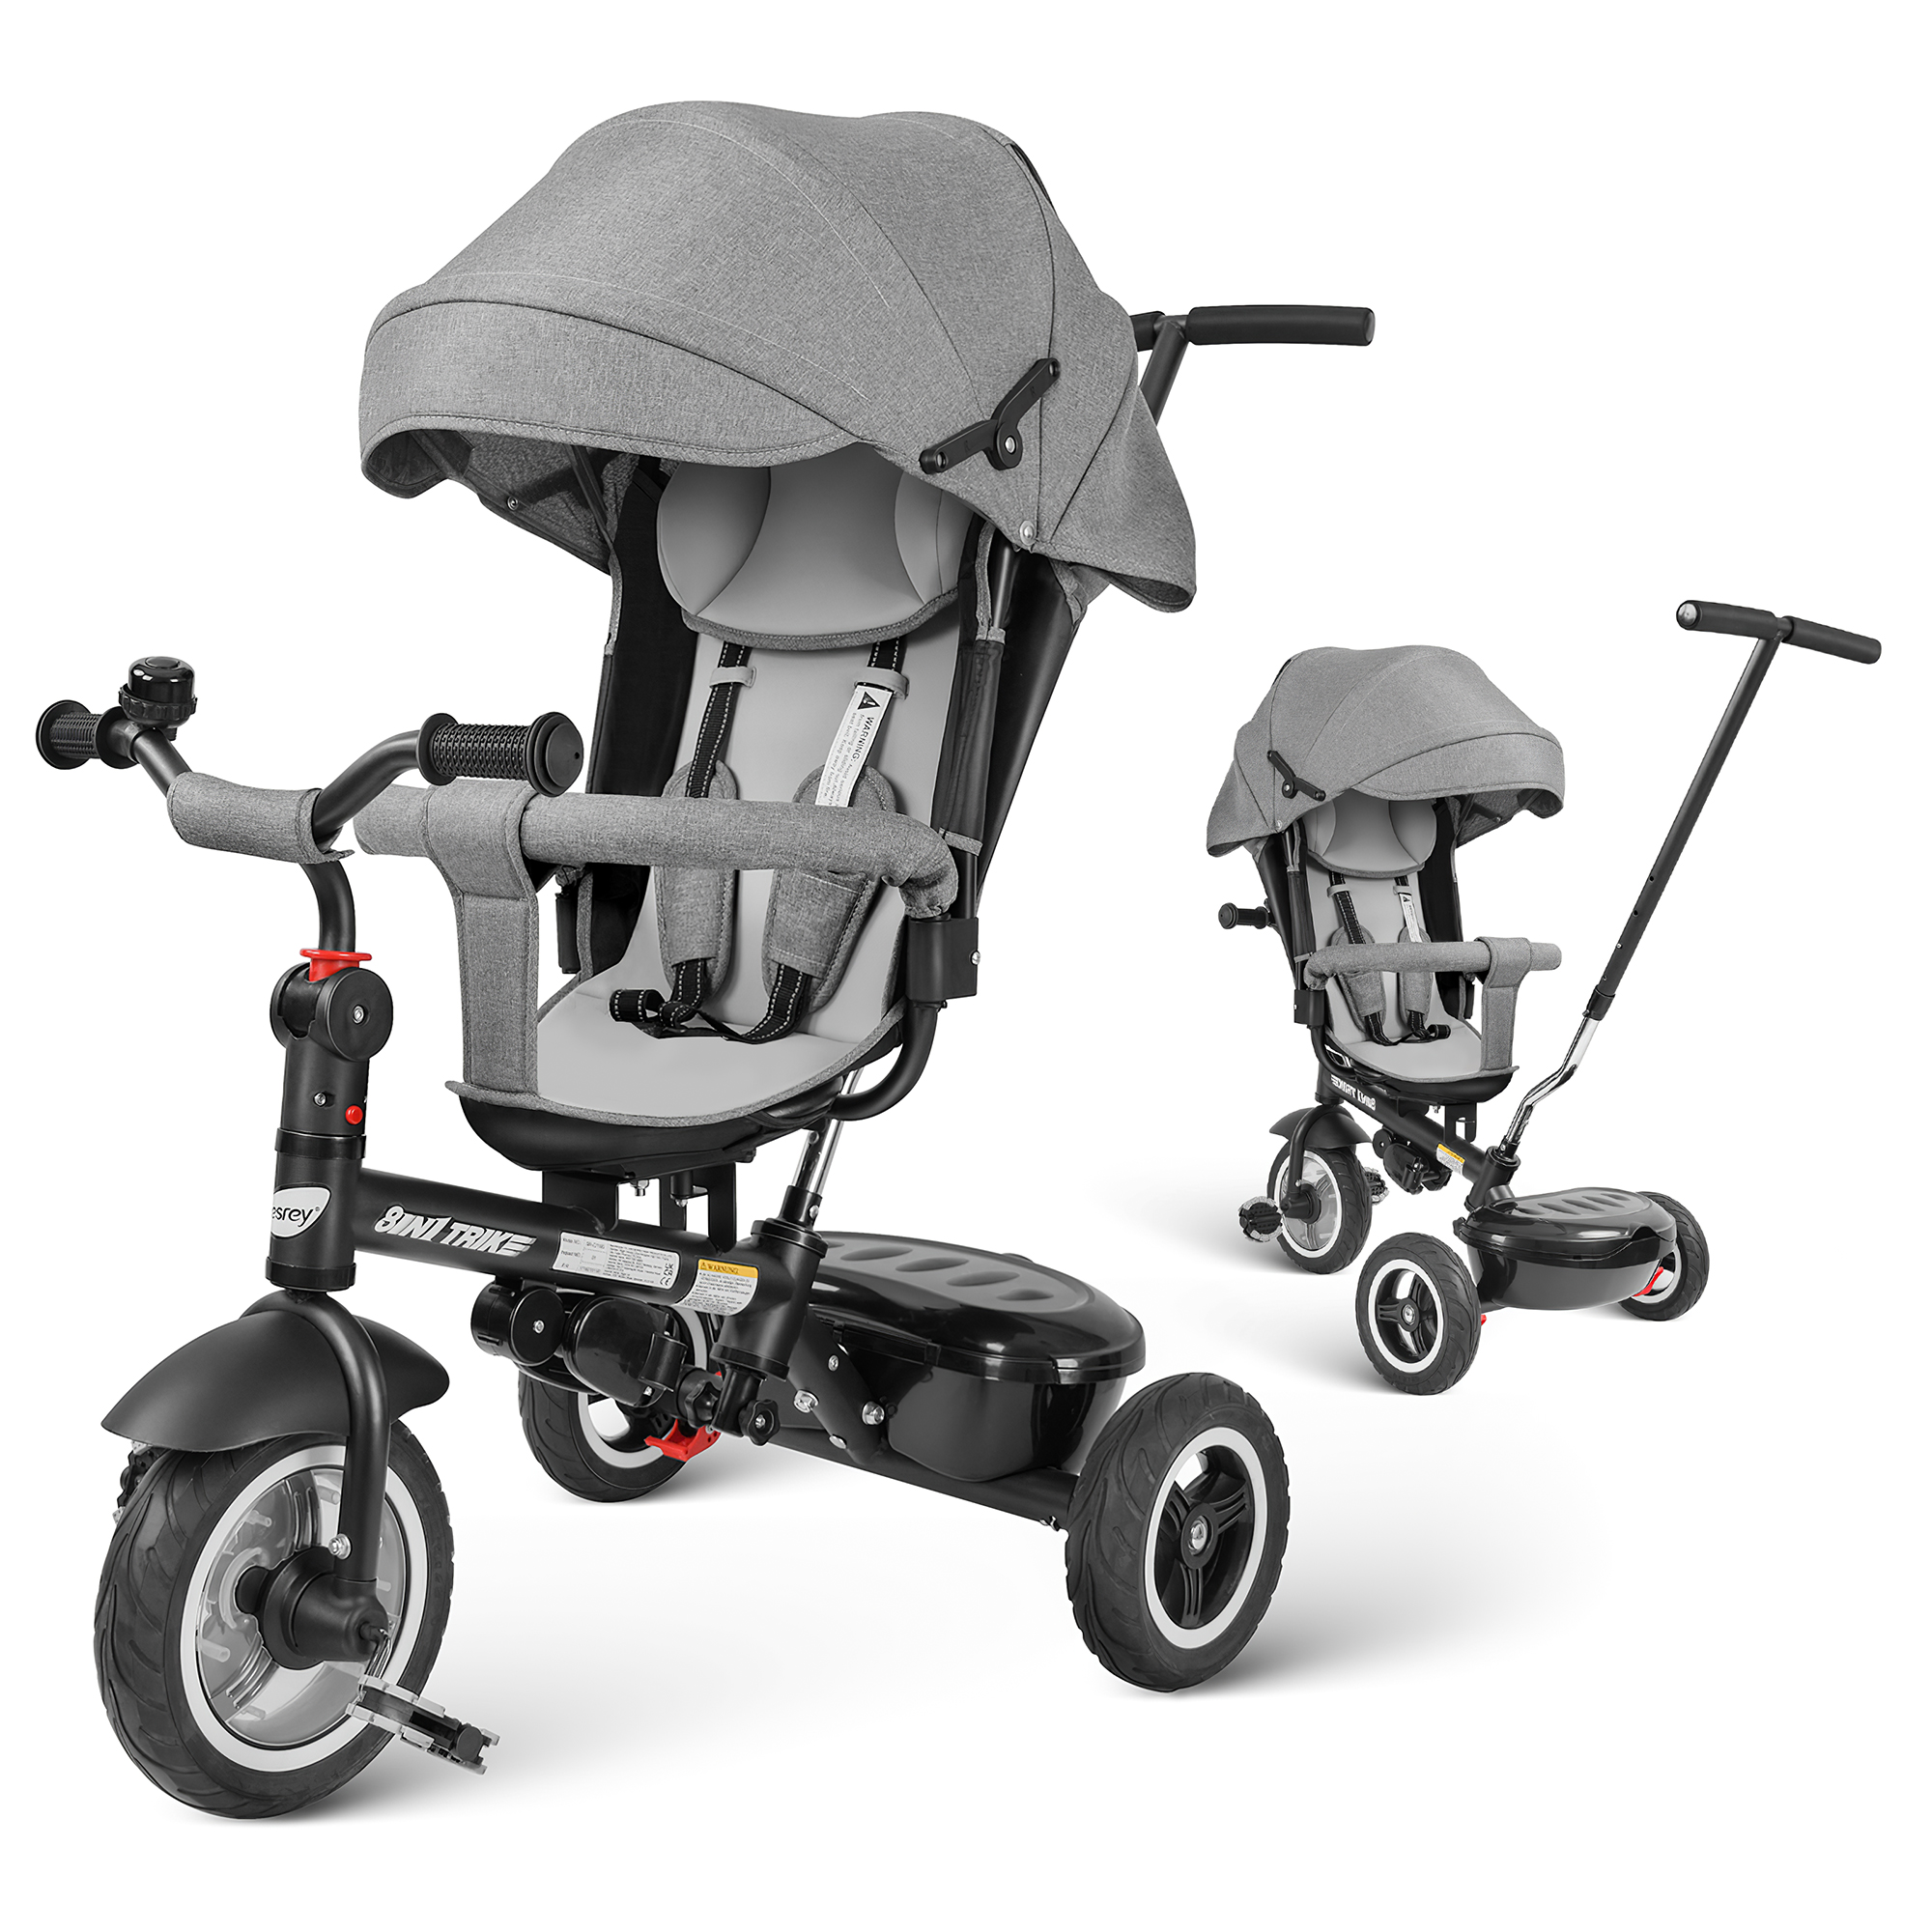 Besrey Kids Tricycle Stroller, 7 in 1 Baby Trike with Reversible Seat for Child Age 1-6, Unisex Gray - image 1 of 12